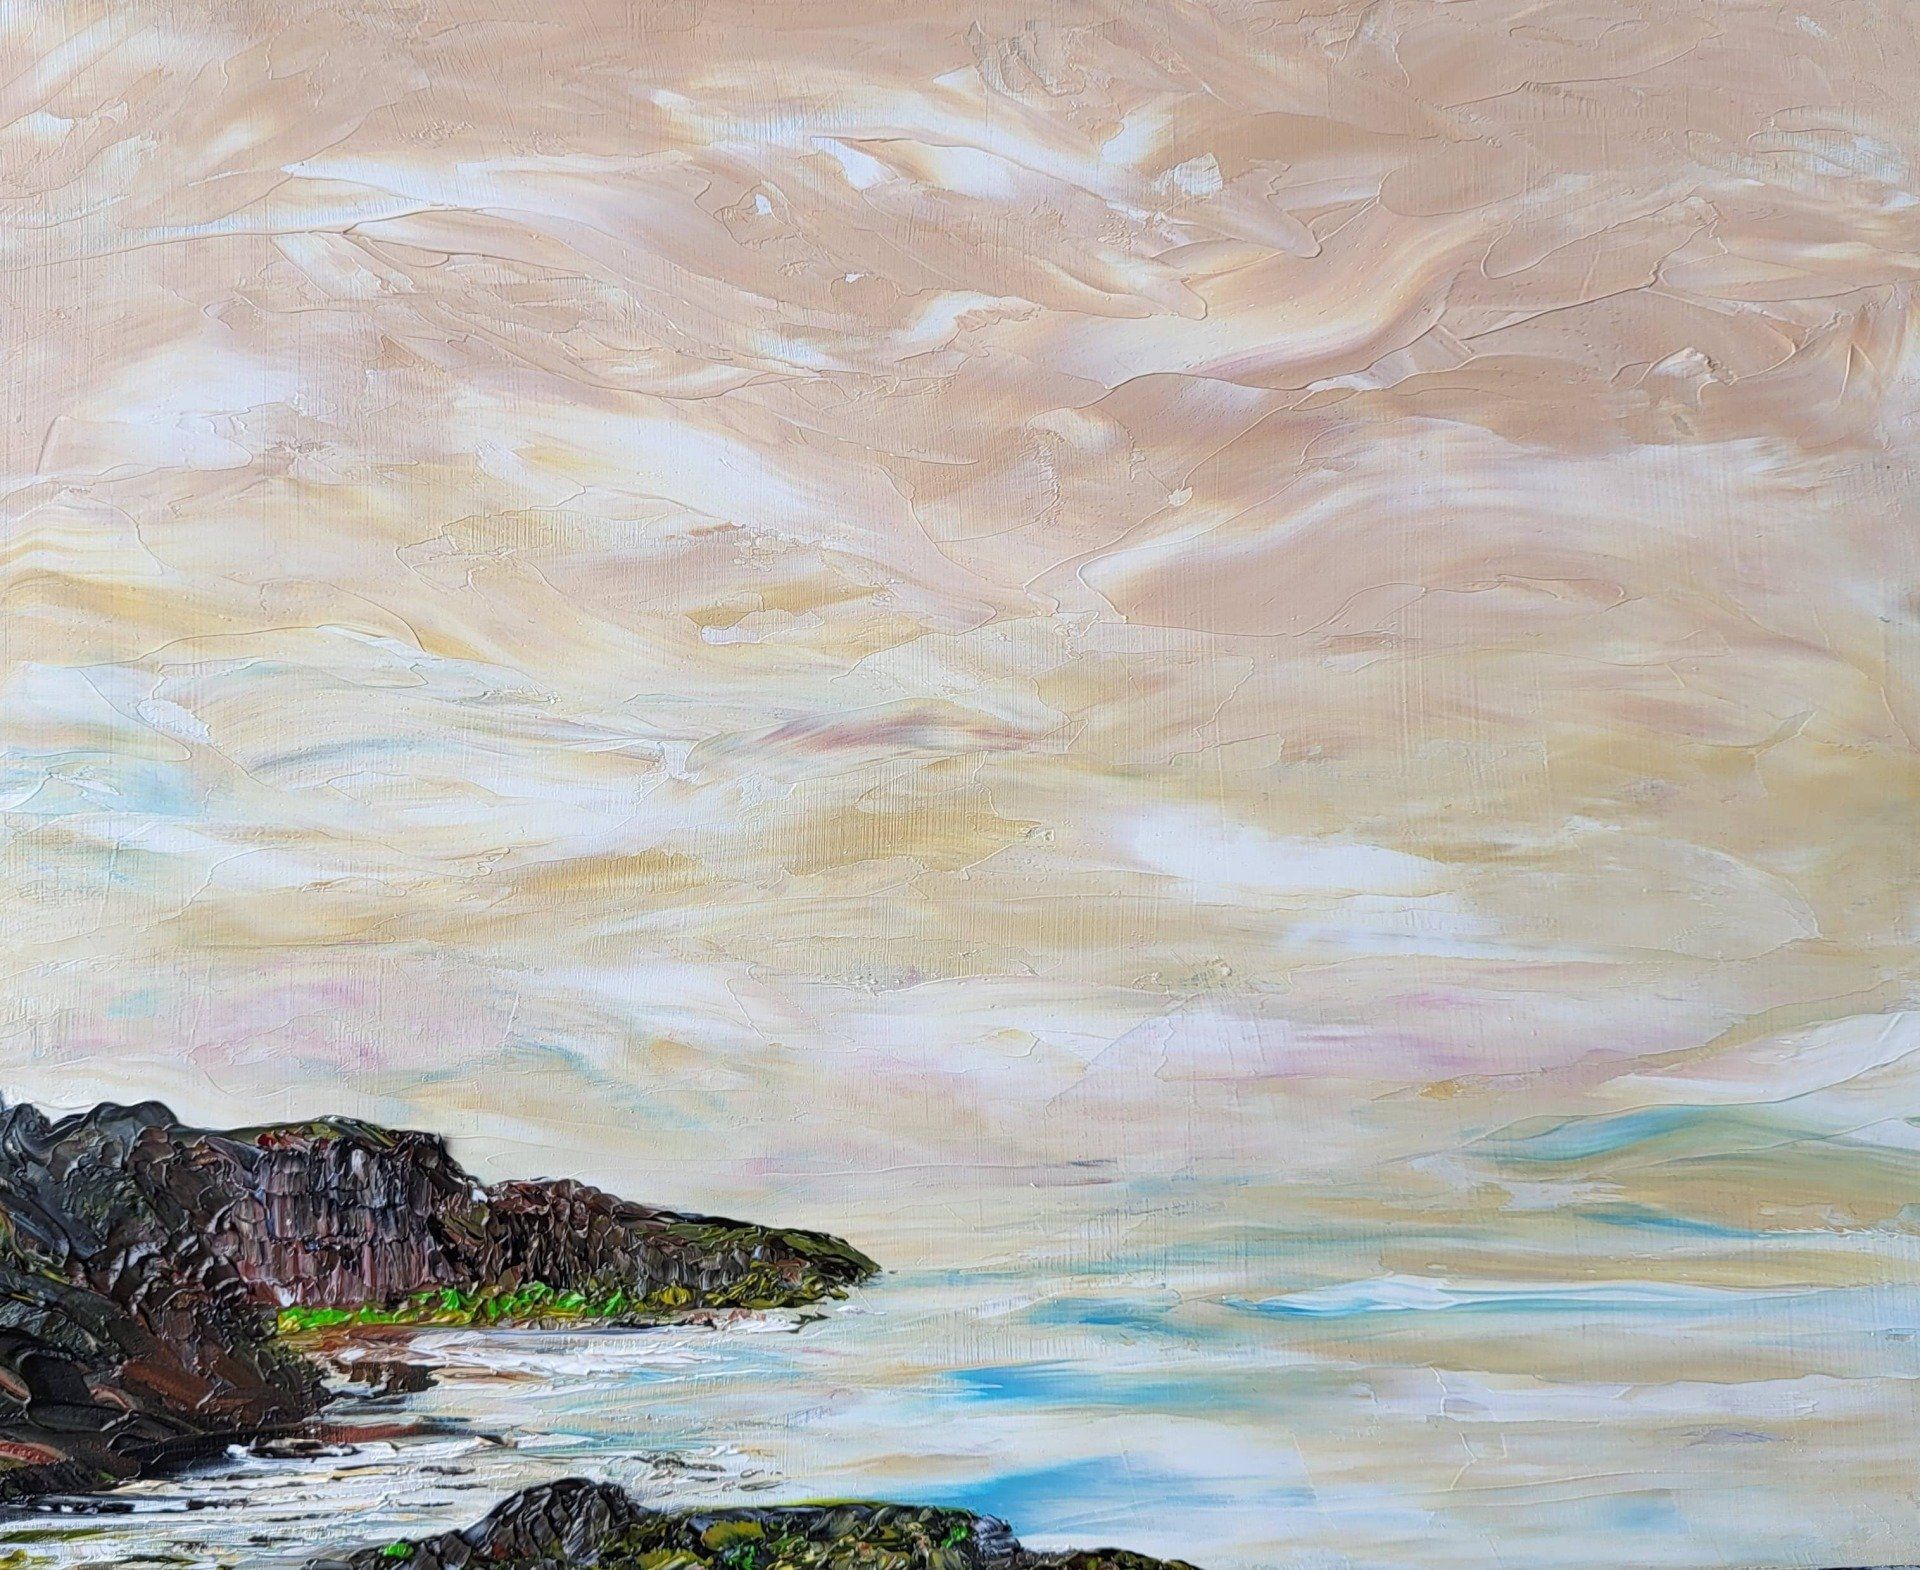 This 10 in. x 8 in. oil on Masonite is dramatic. The sky is in full movement with the signature colours of the collection - Naples Yellow, white, blues, and bold swatches of Buff White. The Island is on the left side of the painting with steep cliffs in earth tones. The cove is welcoming and belies a hint of luscious vegetation as you move into the centre of the island. The waters are calm and it may be low tide.